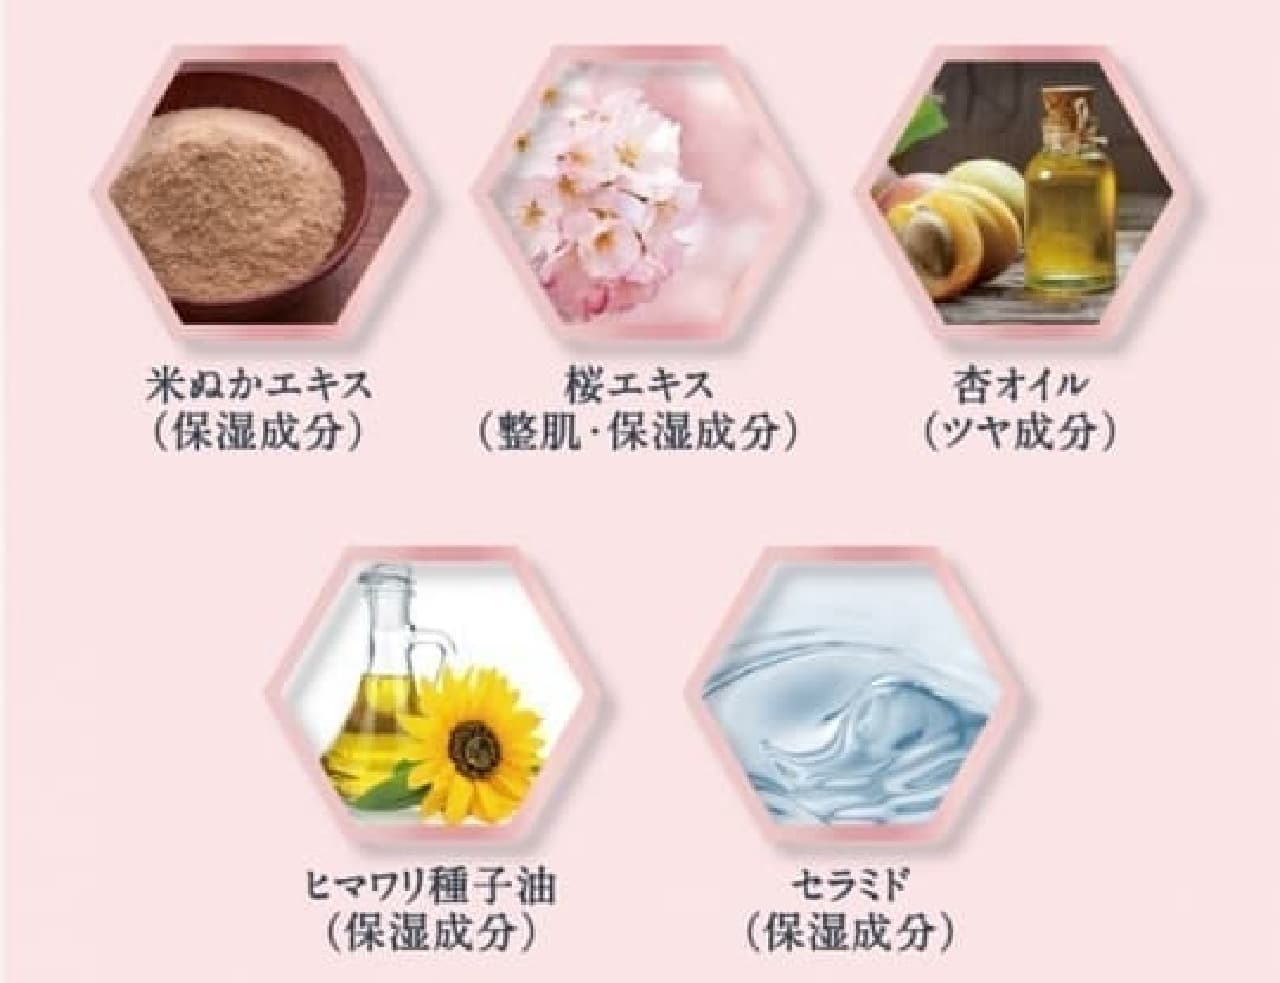 Ingredients for "Clear Natural Gloss Scalp Shampoo" and "Clear Natural Gloss Scalp Conditioner"